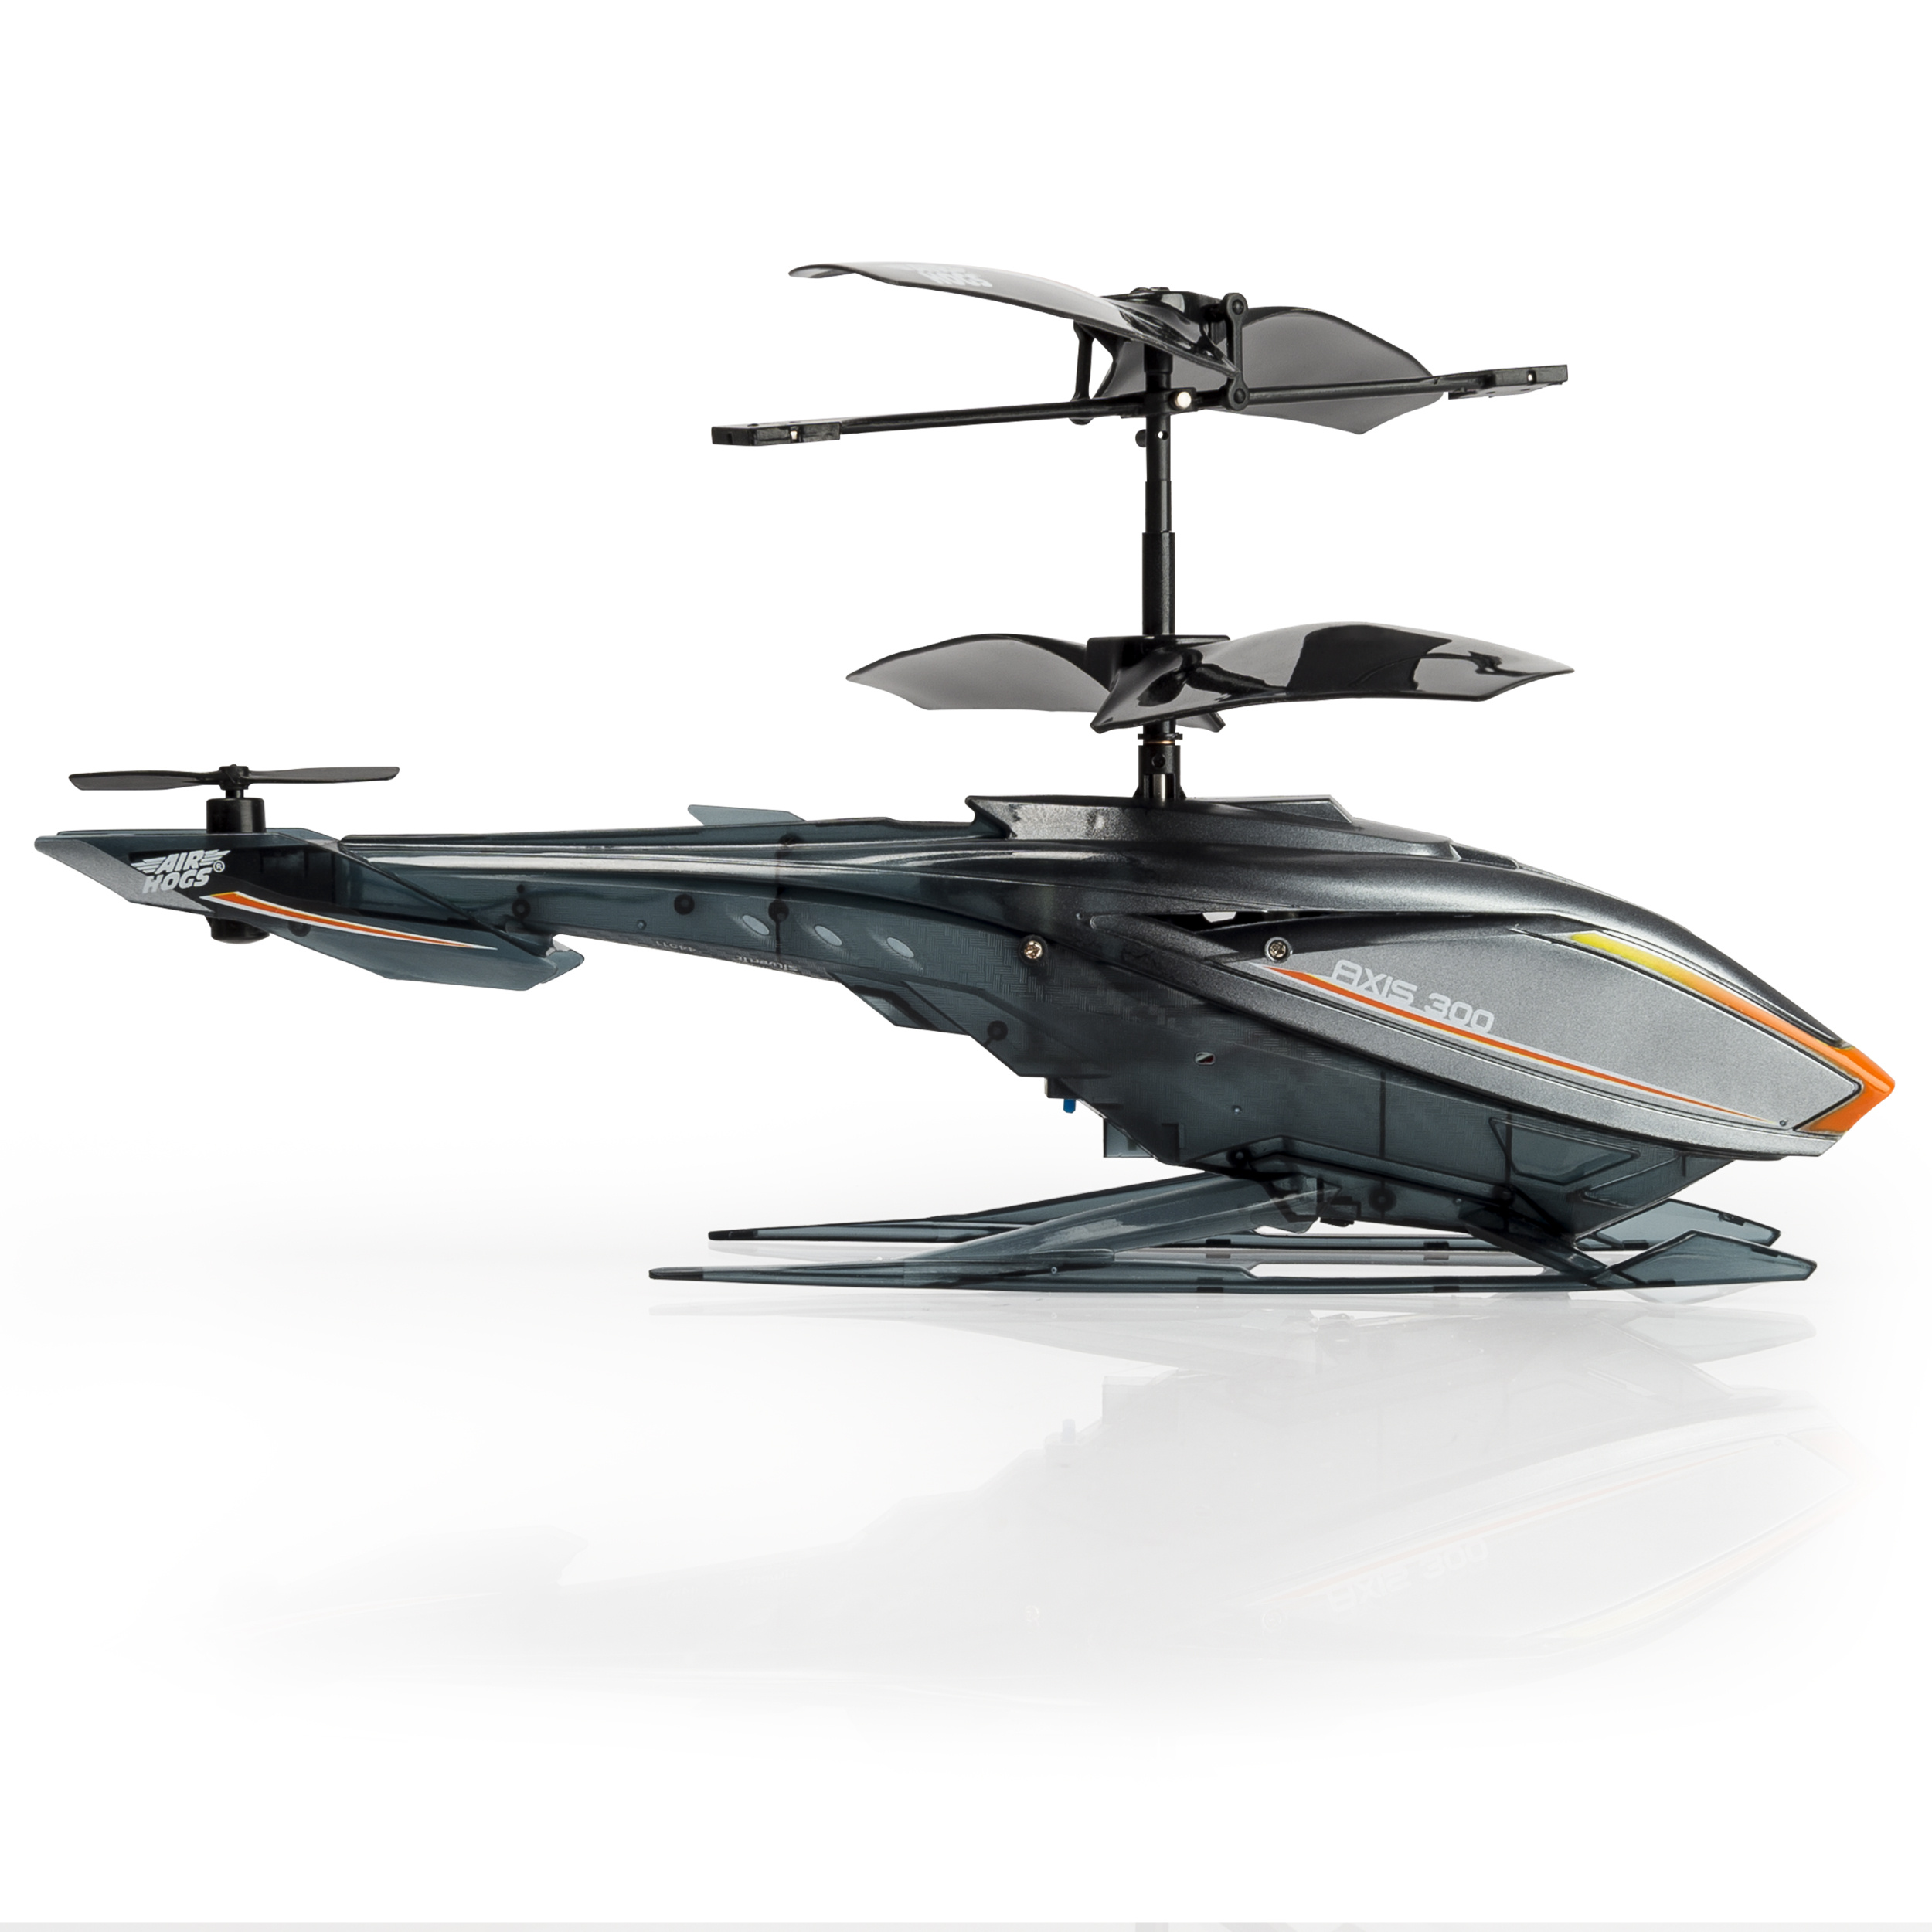 Air Hogs RC Axis 300X, Gray R/C Helicopter with Batteries - image 3 of 6